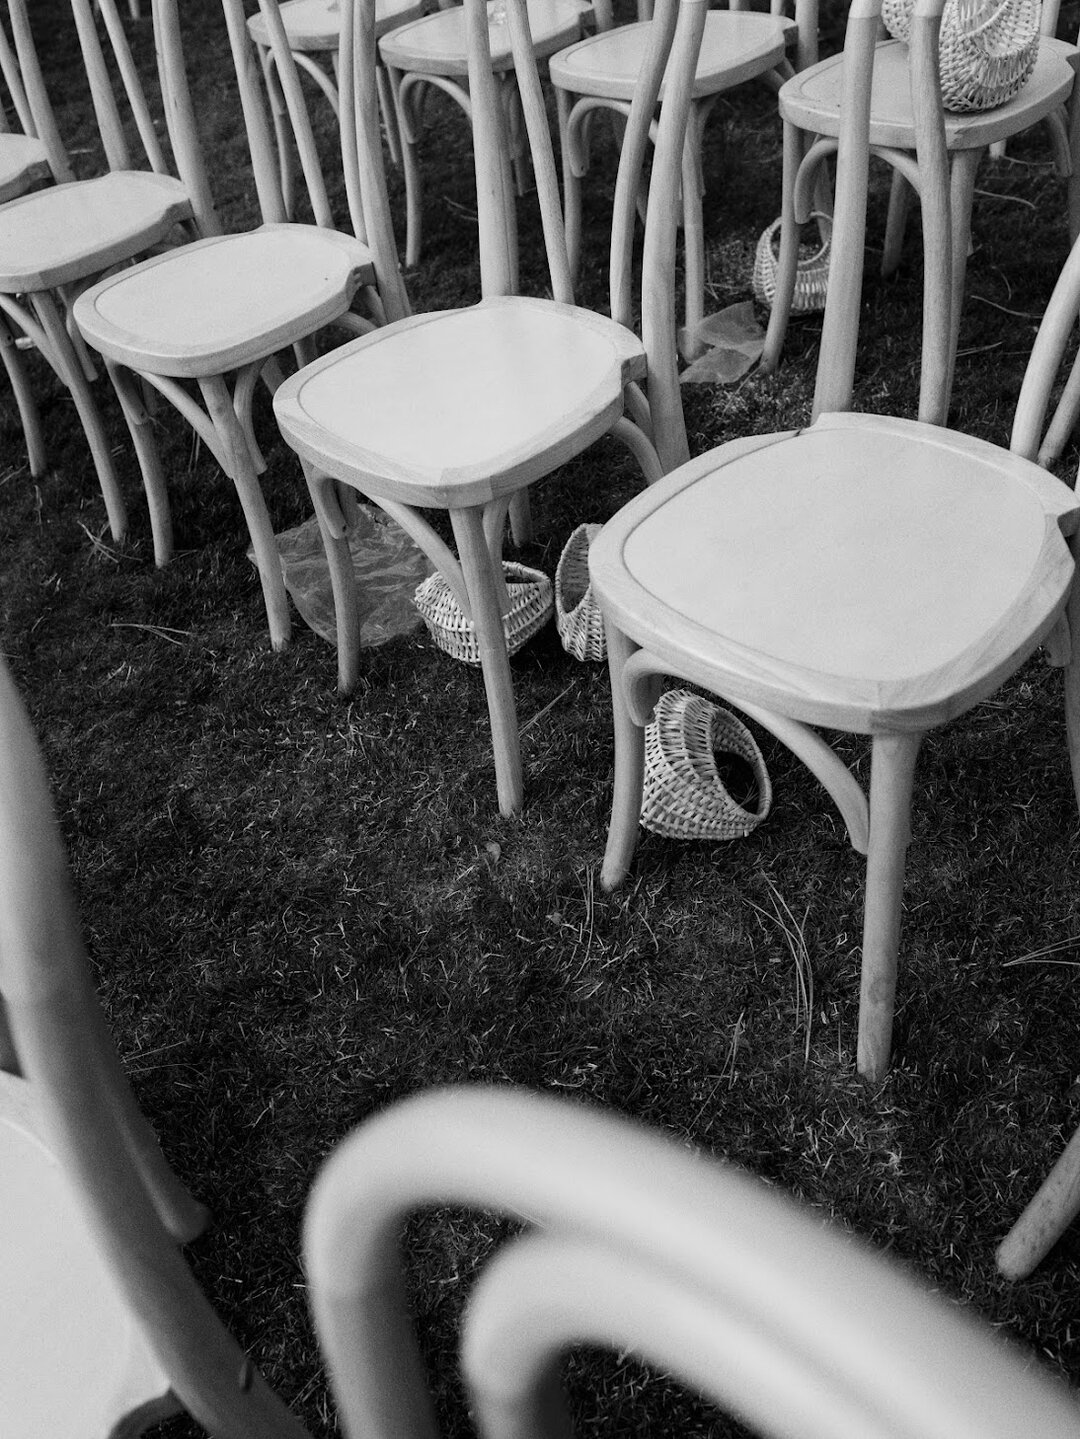 We love a good b+w detail shot. These are our newest chairs, our High Desert Bentwoods! Inquire today on our website to see if they're available for your big day. 

📷 @rtfaithphotography
@danielledemarcosmith
@blackbutteranchweddings
@flipflopsounds